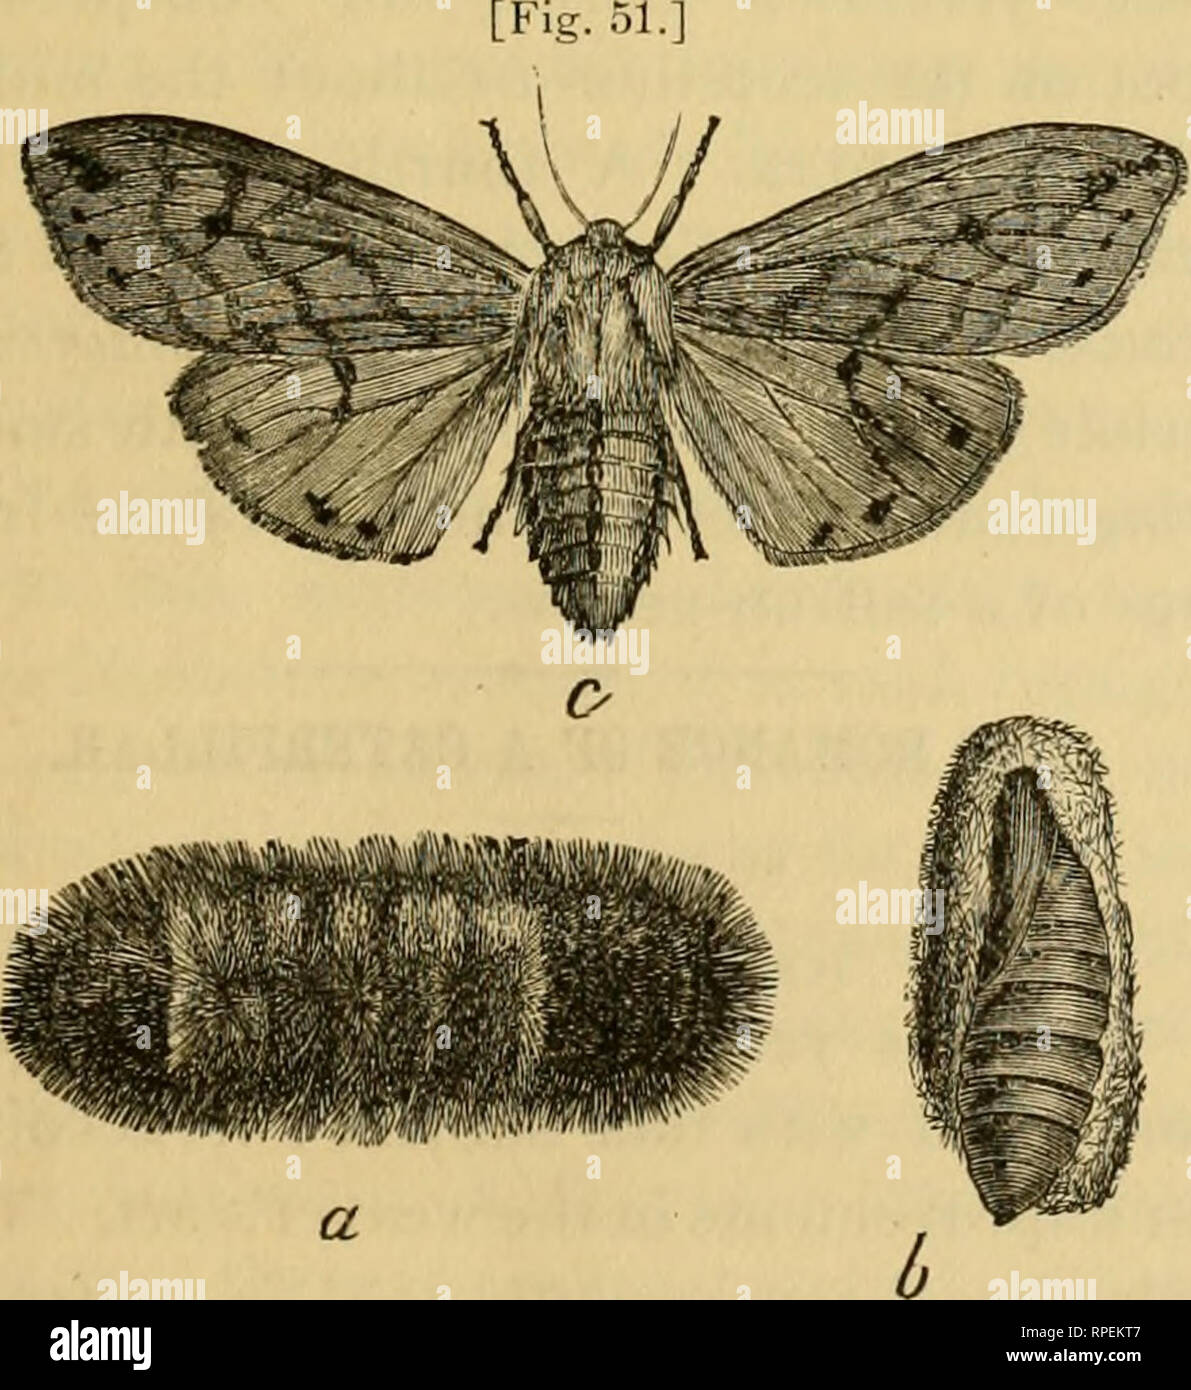 . The American entomologist. Entomology. Vol. Ill-se'^i^s, Vol.1 NEW YORK, JUNE, 1880, No. 6, PUBLISHED MONTHLY BY THE HUB PUBLISHING CO. of n. y. 323 Pearl St., New Vork. TERMS Two dollars per annum, in advance. EDITORS : RILEY, Editor Washington, D. C. .... Ridgewood, N. J. CHAS A. S. FULLER, Assistant Ed NOTES ON OUR COMMONER INSECTS. THE EDITOR. The Isabella Tiger-moth (Arctia Pyrrharctia isabella,'S&gt;m.). Every one who reads this has doubtless seen the black-and-tan caterpillar which we herewith illustrate (Fig. 51,^?), but not [Fig.. Hedgehog C.-^teri'ILlak :—a, larva ; 3, cocoon Stock Photo